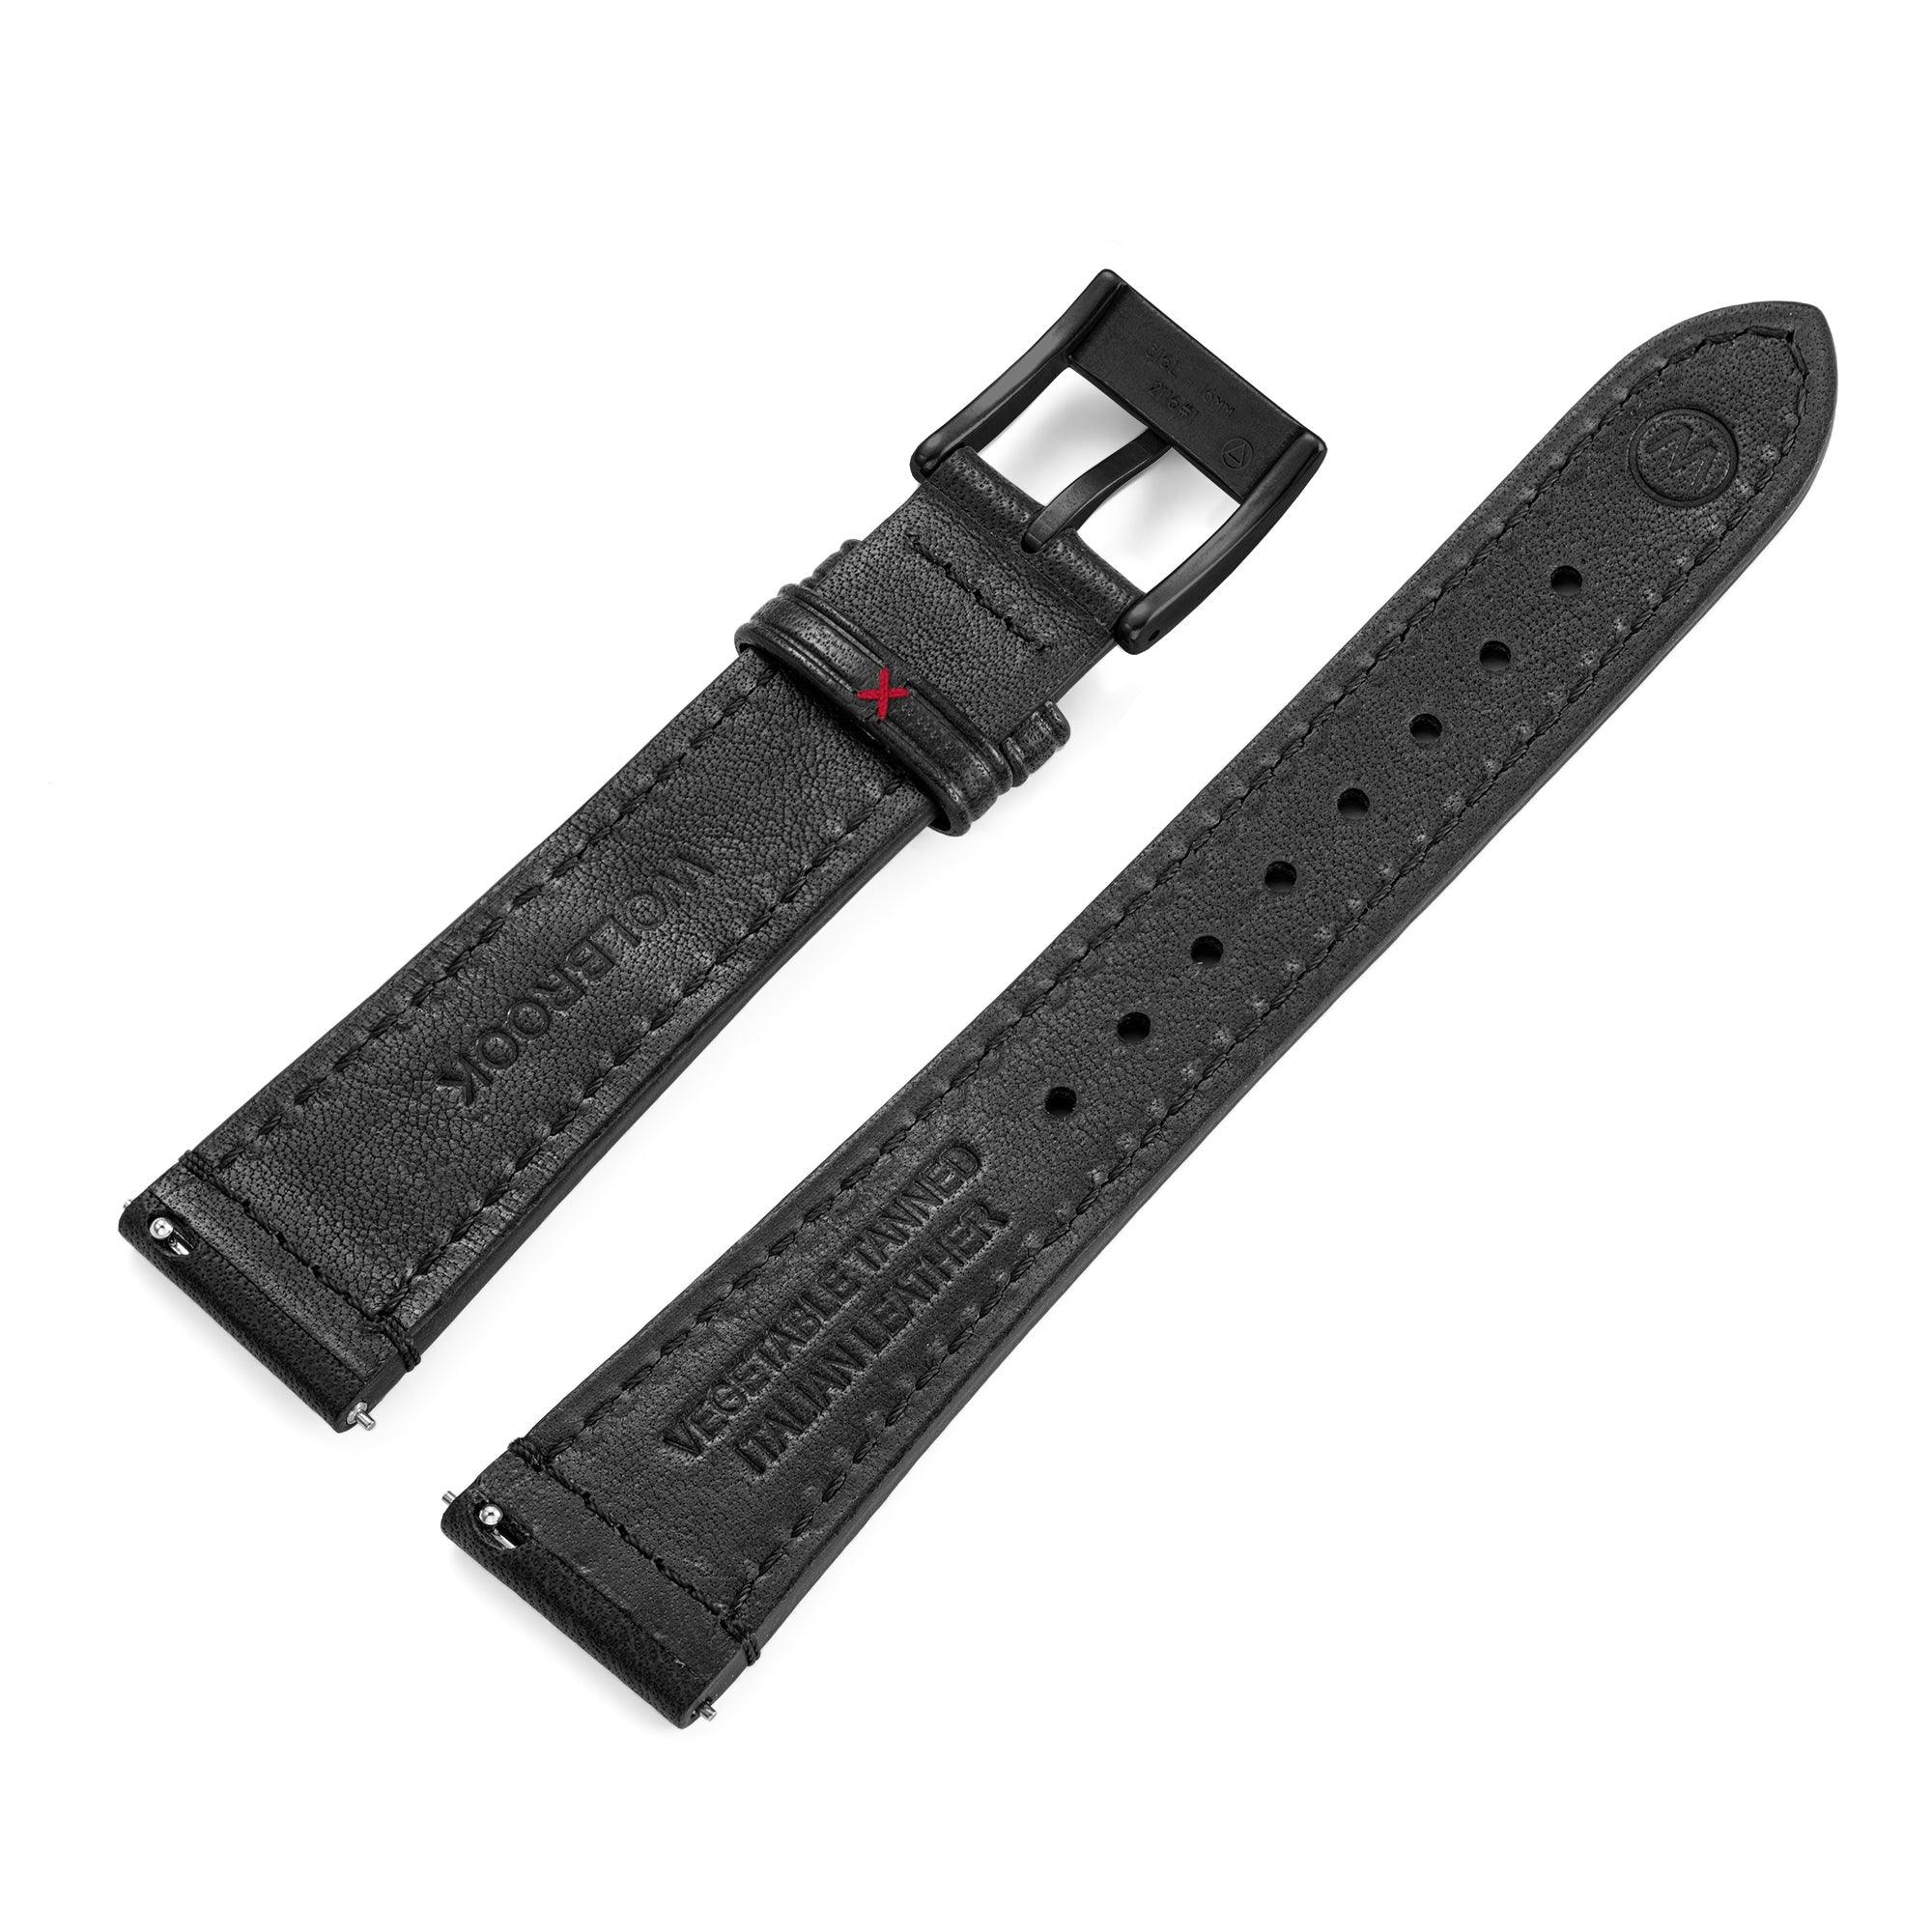 Two-Piece Black Rally Leather Strap & Black PVD Buckle for Racing Watch